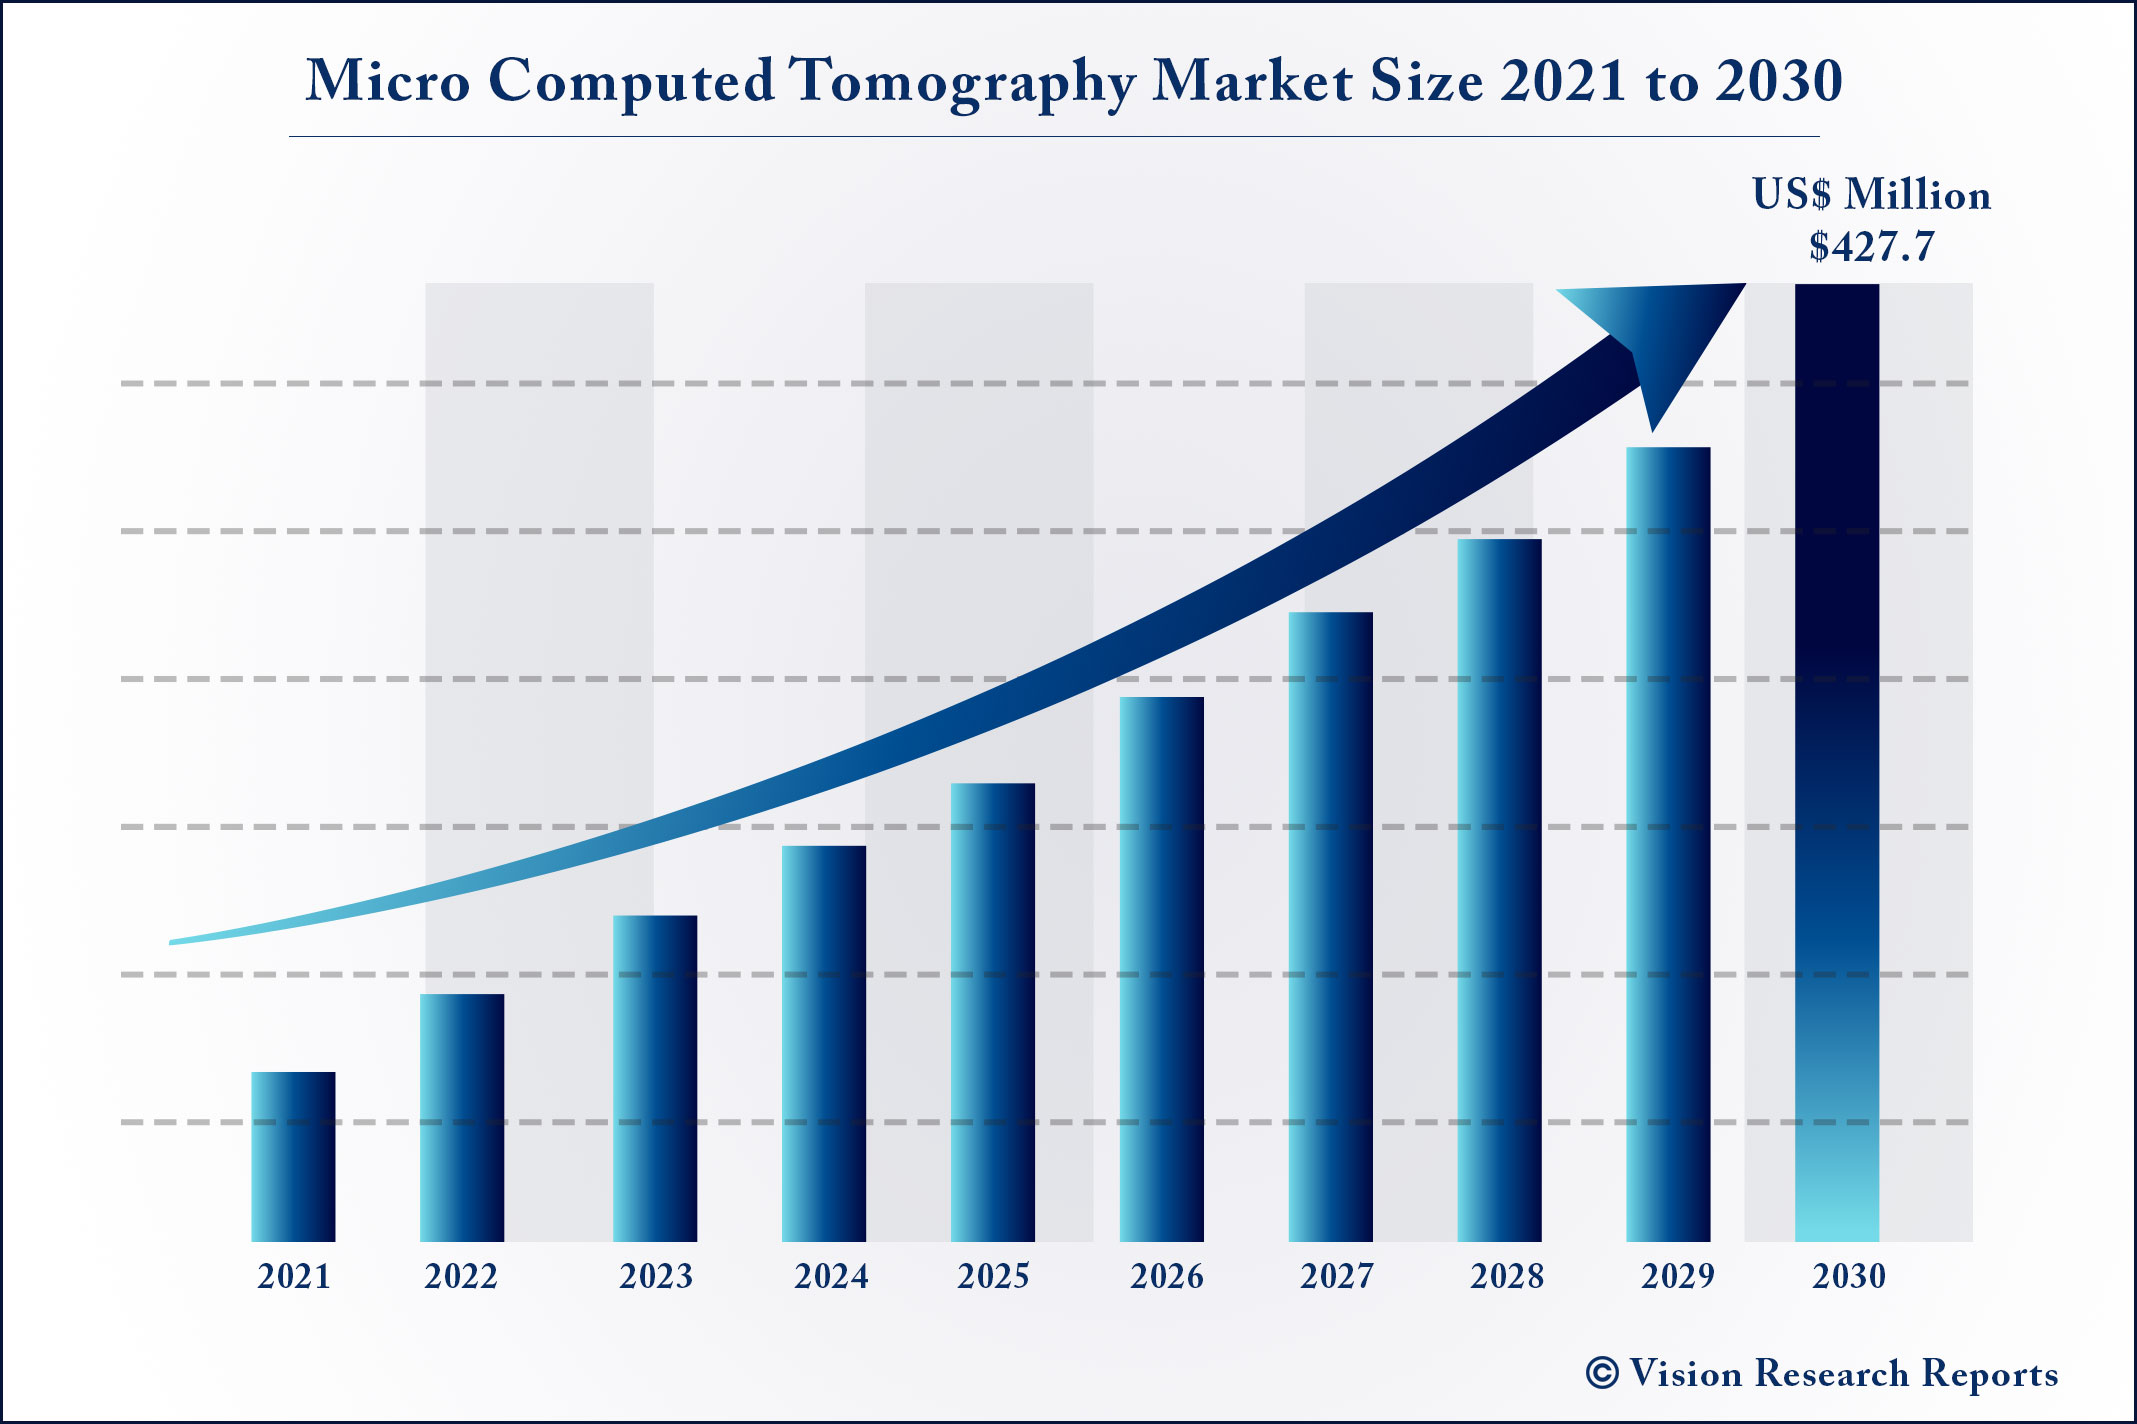 Micro Computed Tomography Market Size 2021 to 2030